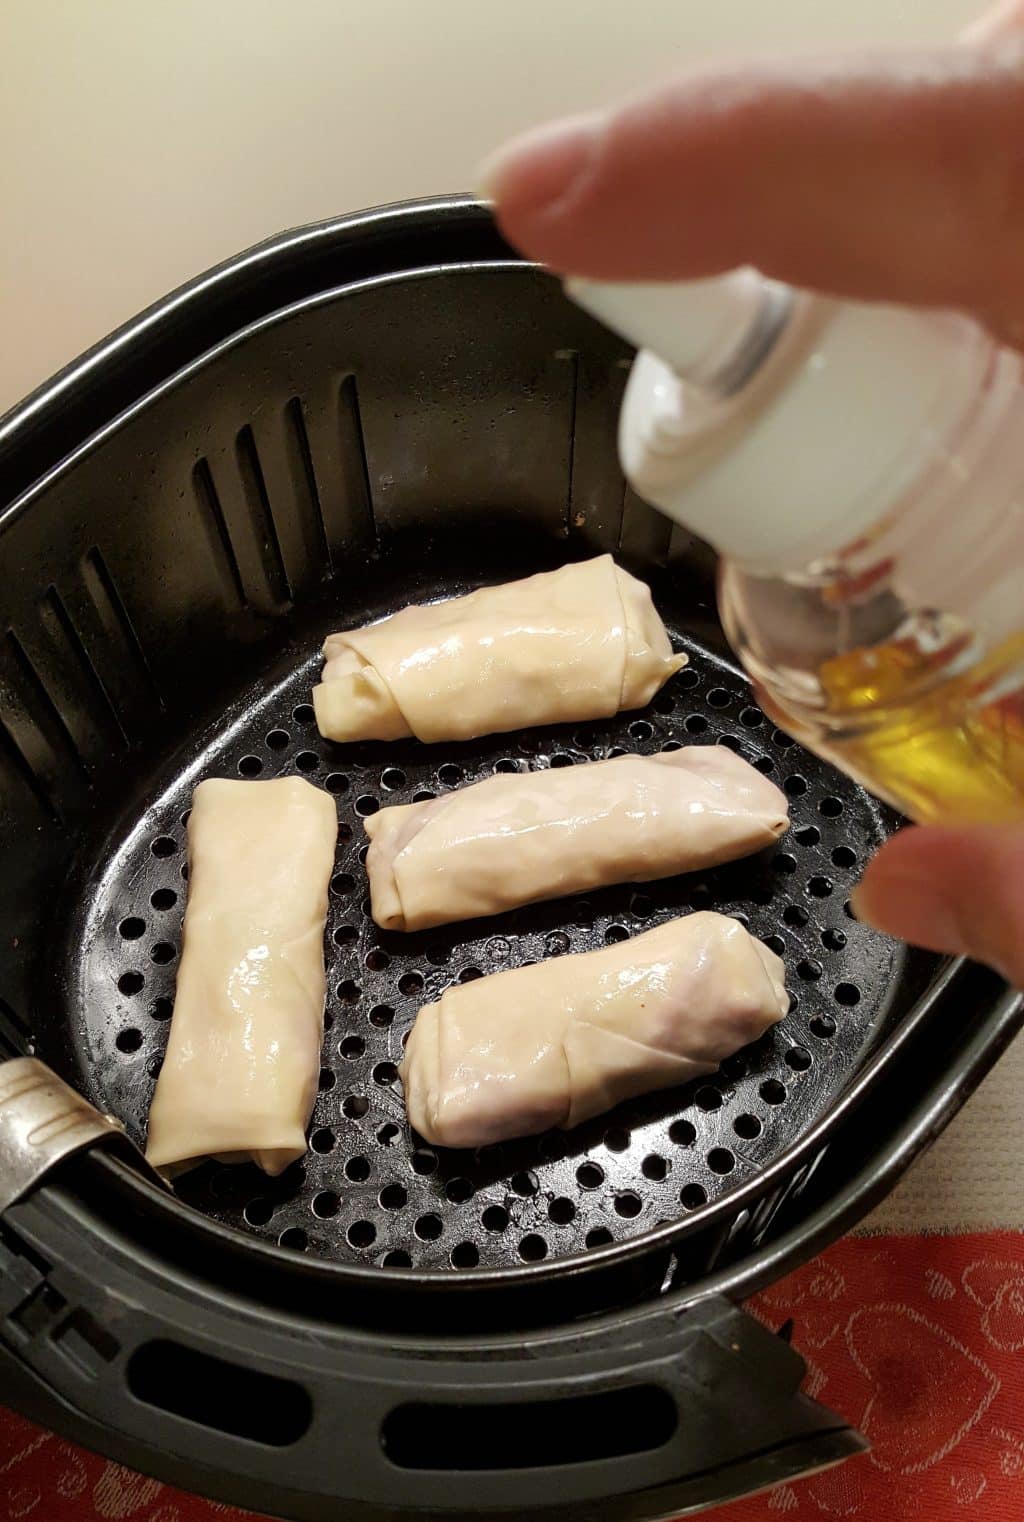 Spray the Egg Rolls with Oil